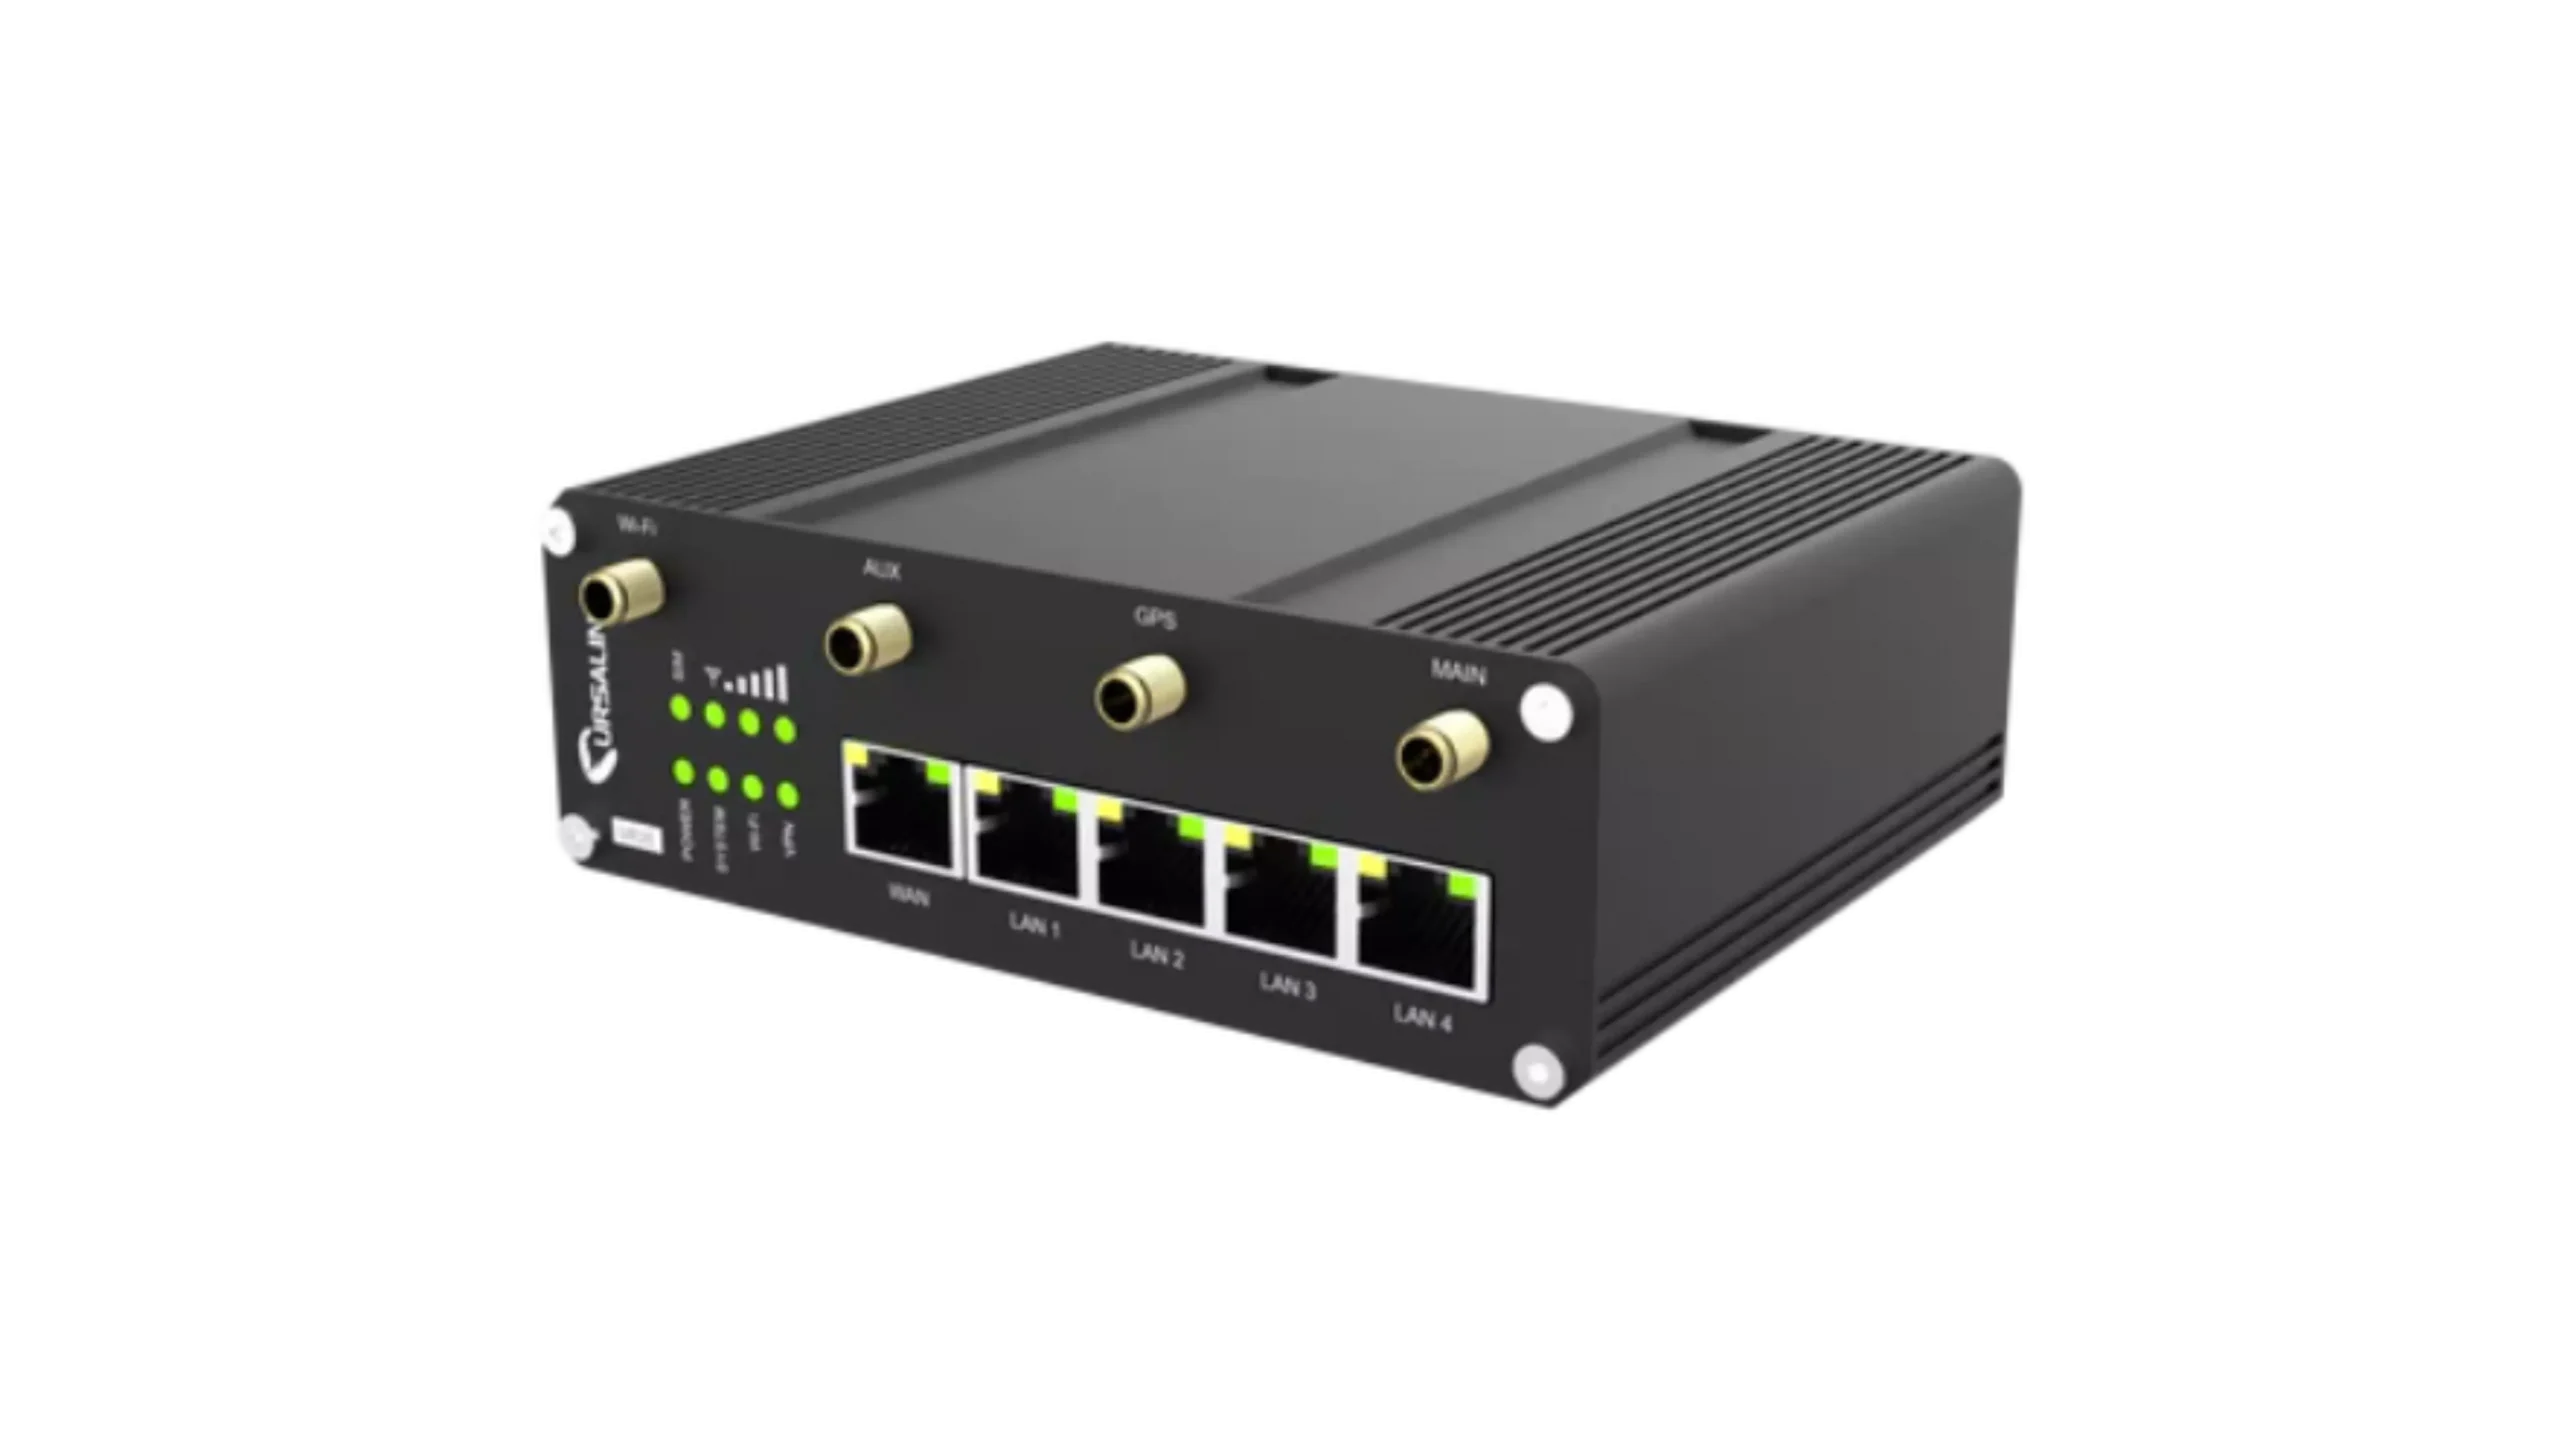 UR75 Ultra Series High-Performance 5G Industrial Router